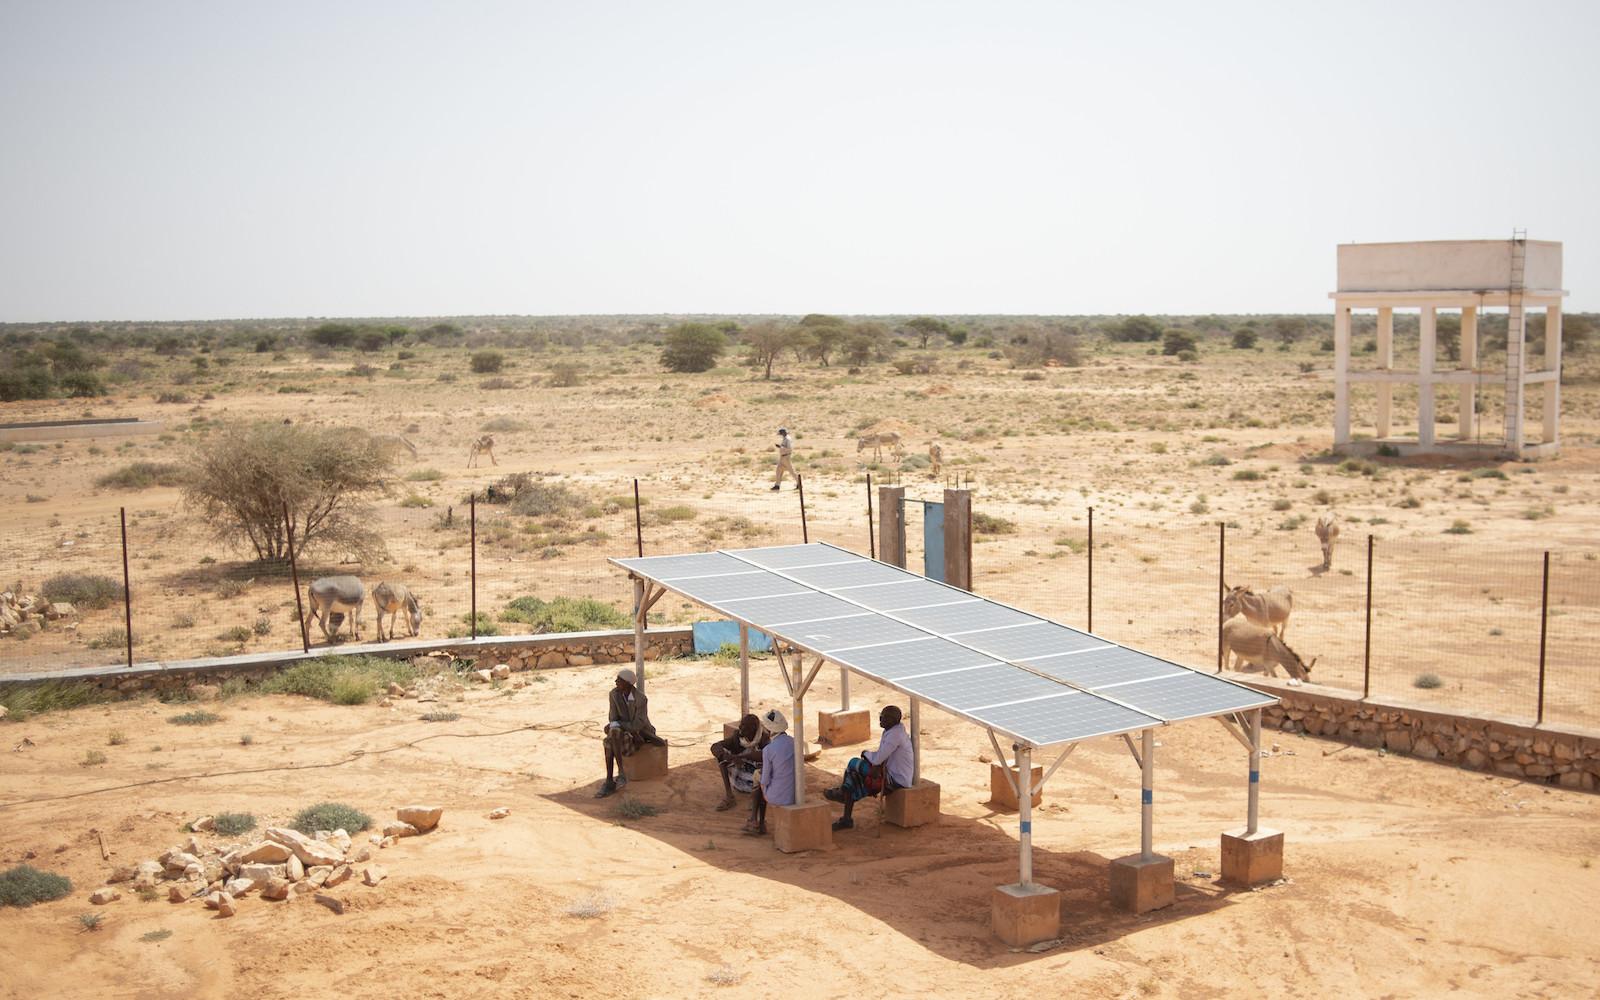 People sit in shade of solar panel